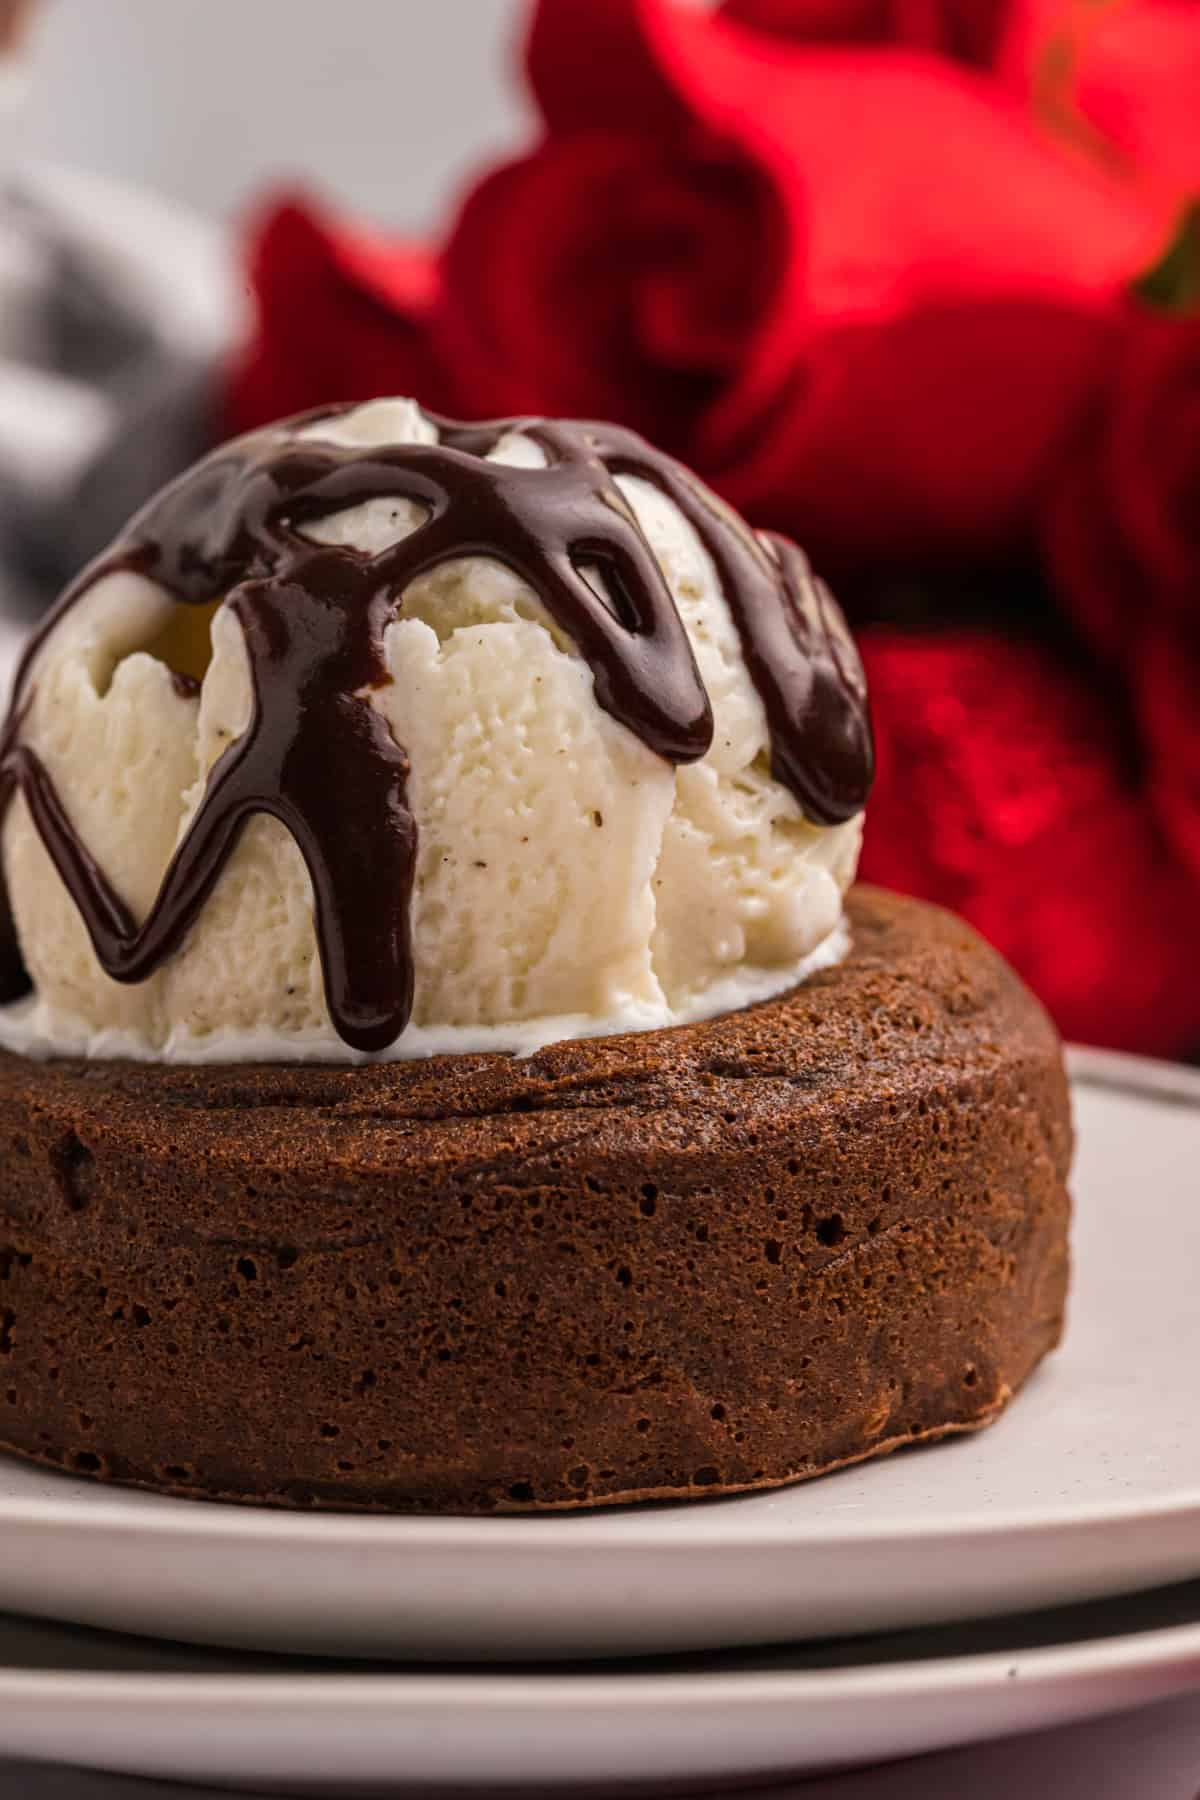 A scoop of vanilla ice cream drizzled with chooclate sauce is on top of a molten lava cake.